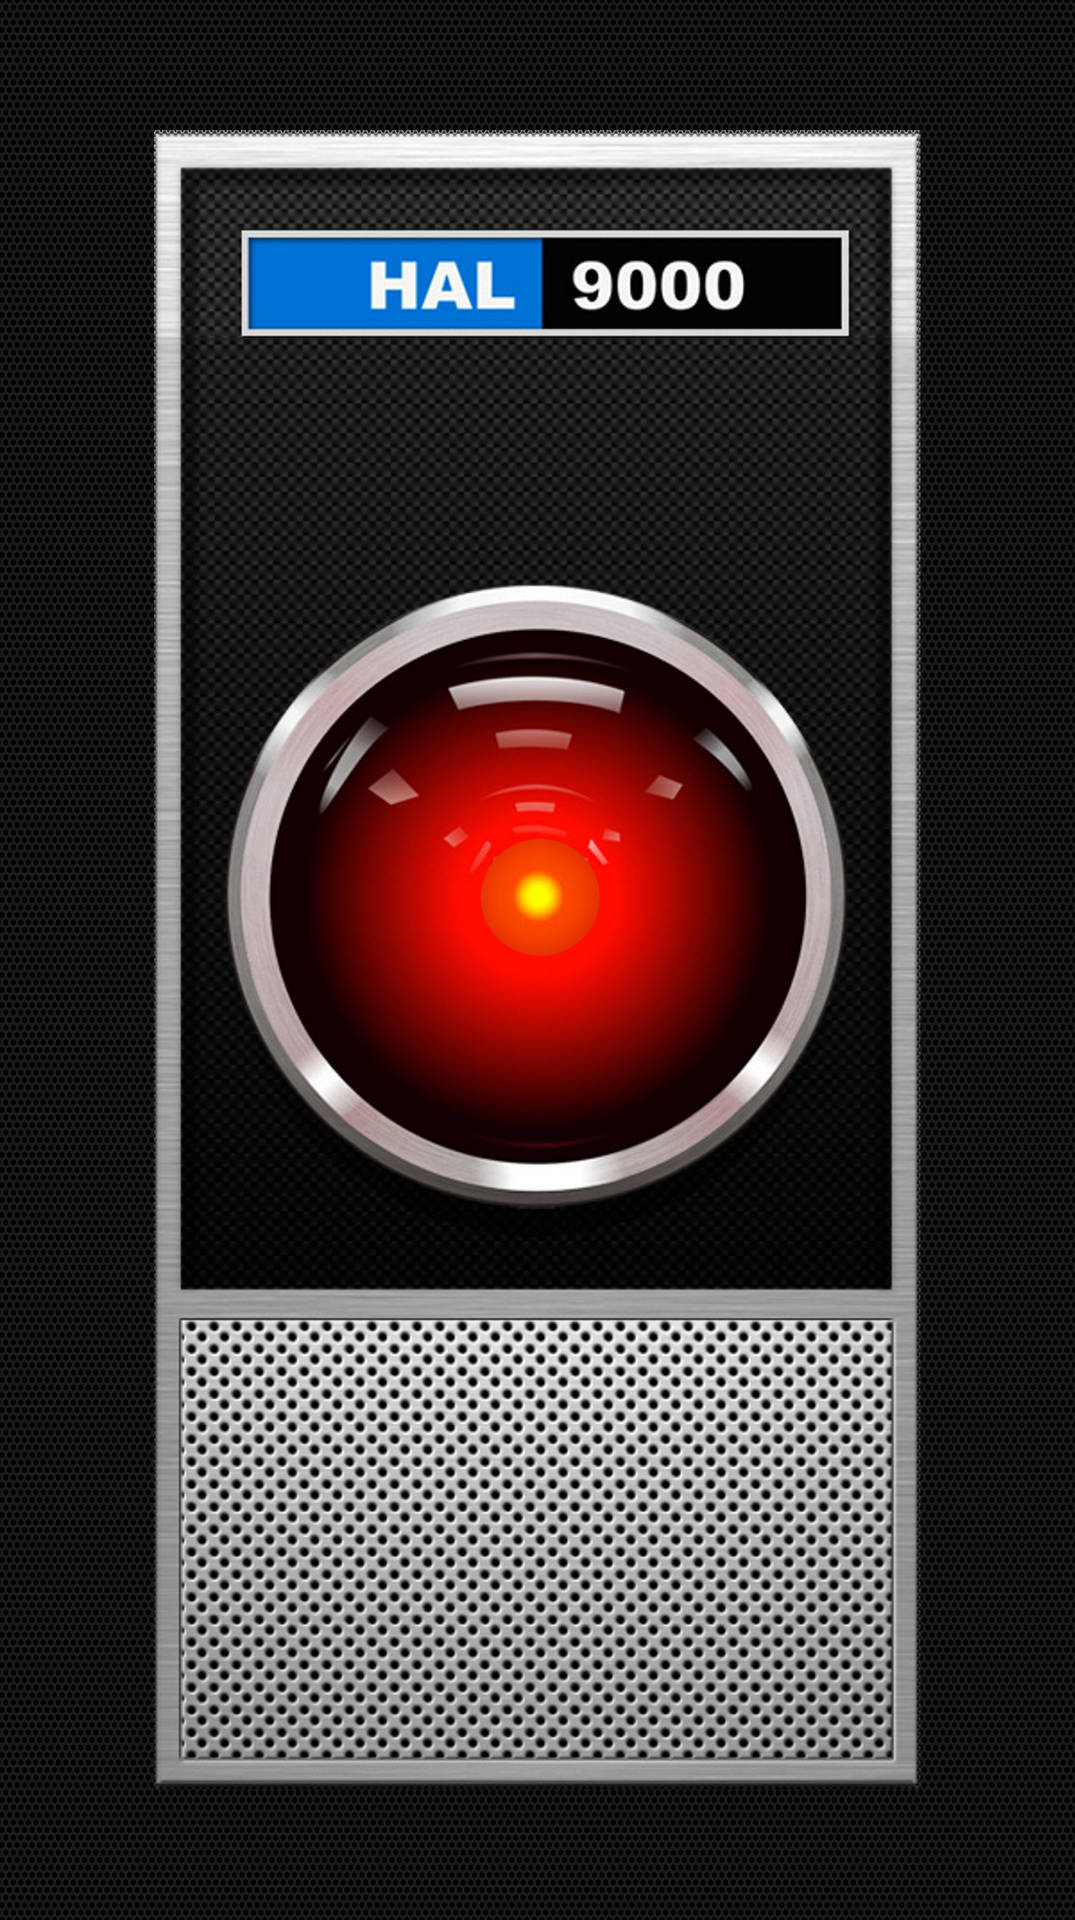 HD wallpaper Movie 2001 A Space Odyssey HAL 9000  Wallpaper Flare